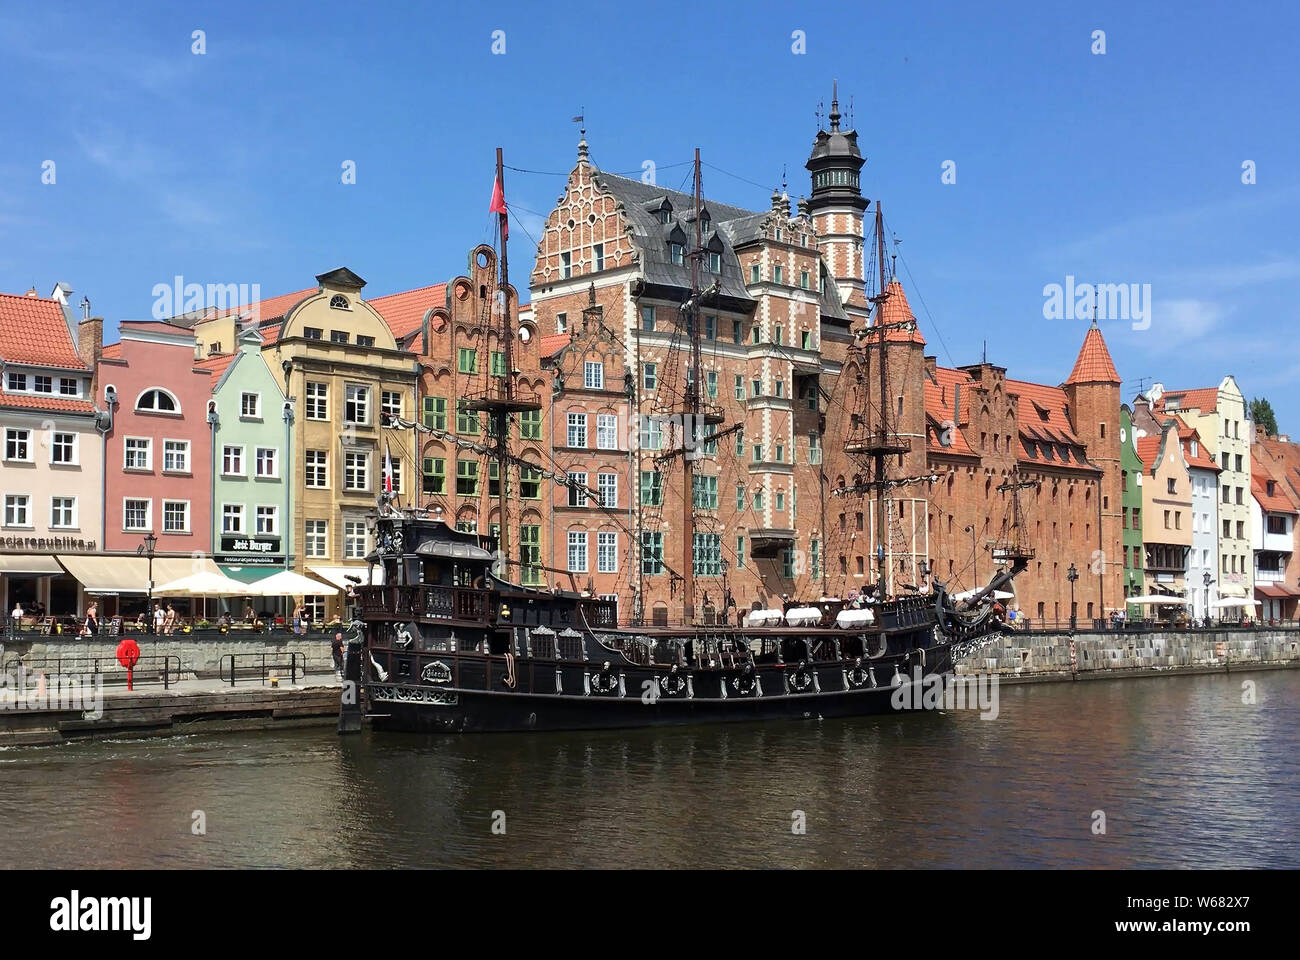 Cityscape of Gdansk with ship on the river Motlawa - Poland. Stock Photo